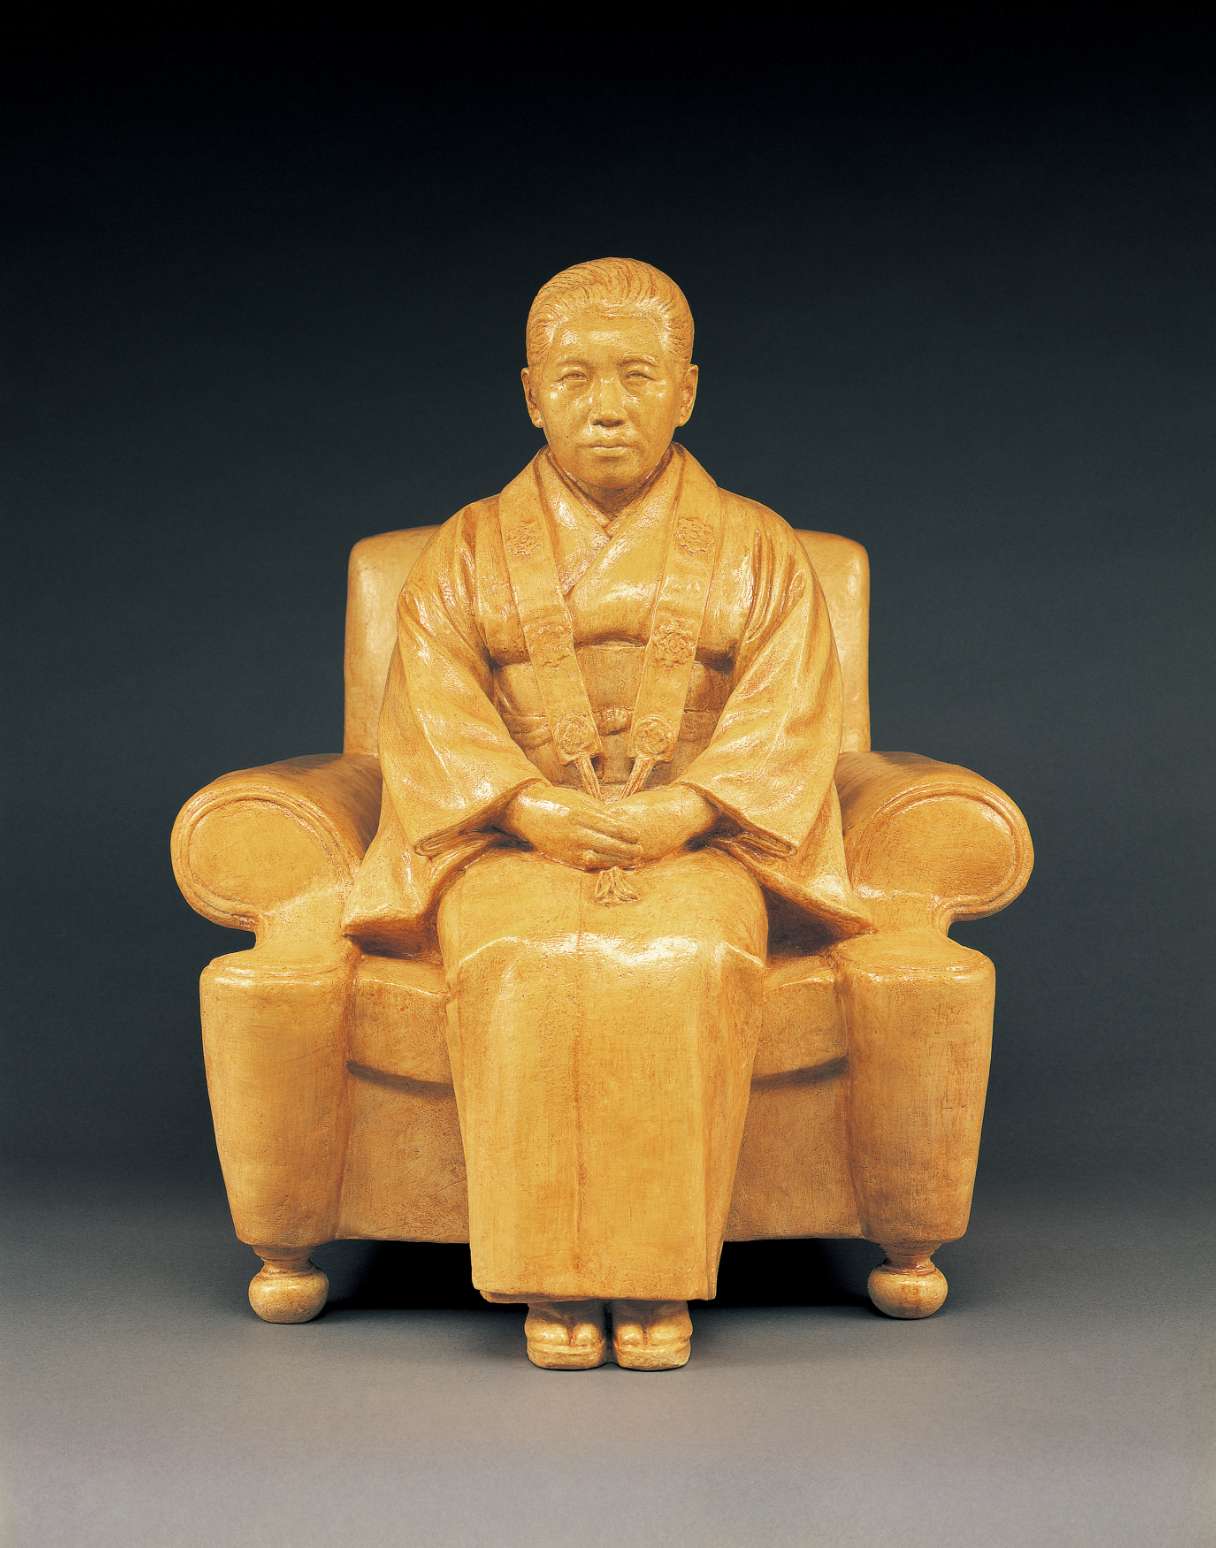 An ochre hued statue of a middle-aged Japanese woman, hair pulled back, wearing a kimono draped with kesa, seated in an upholstered chair, her hands folded neatly in her lap, feet flat on the ground.